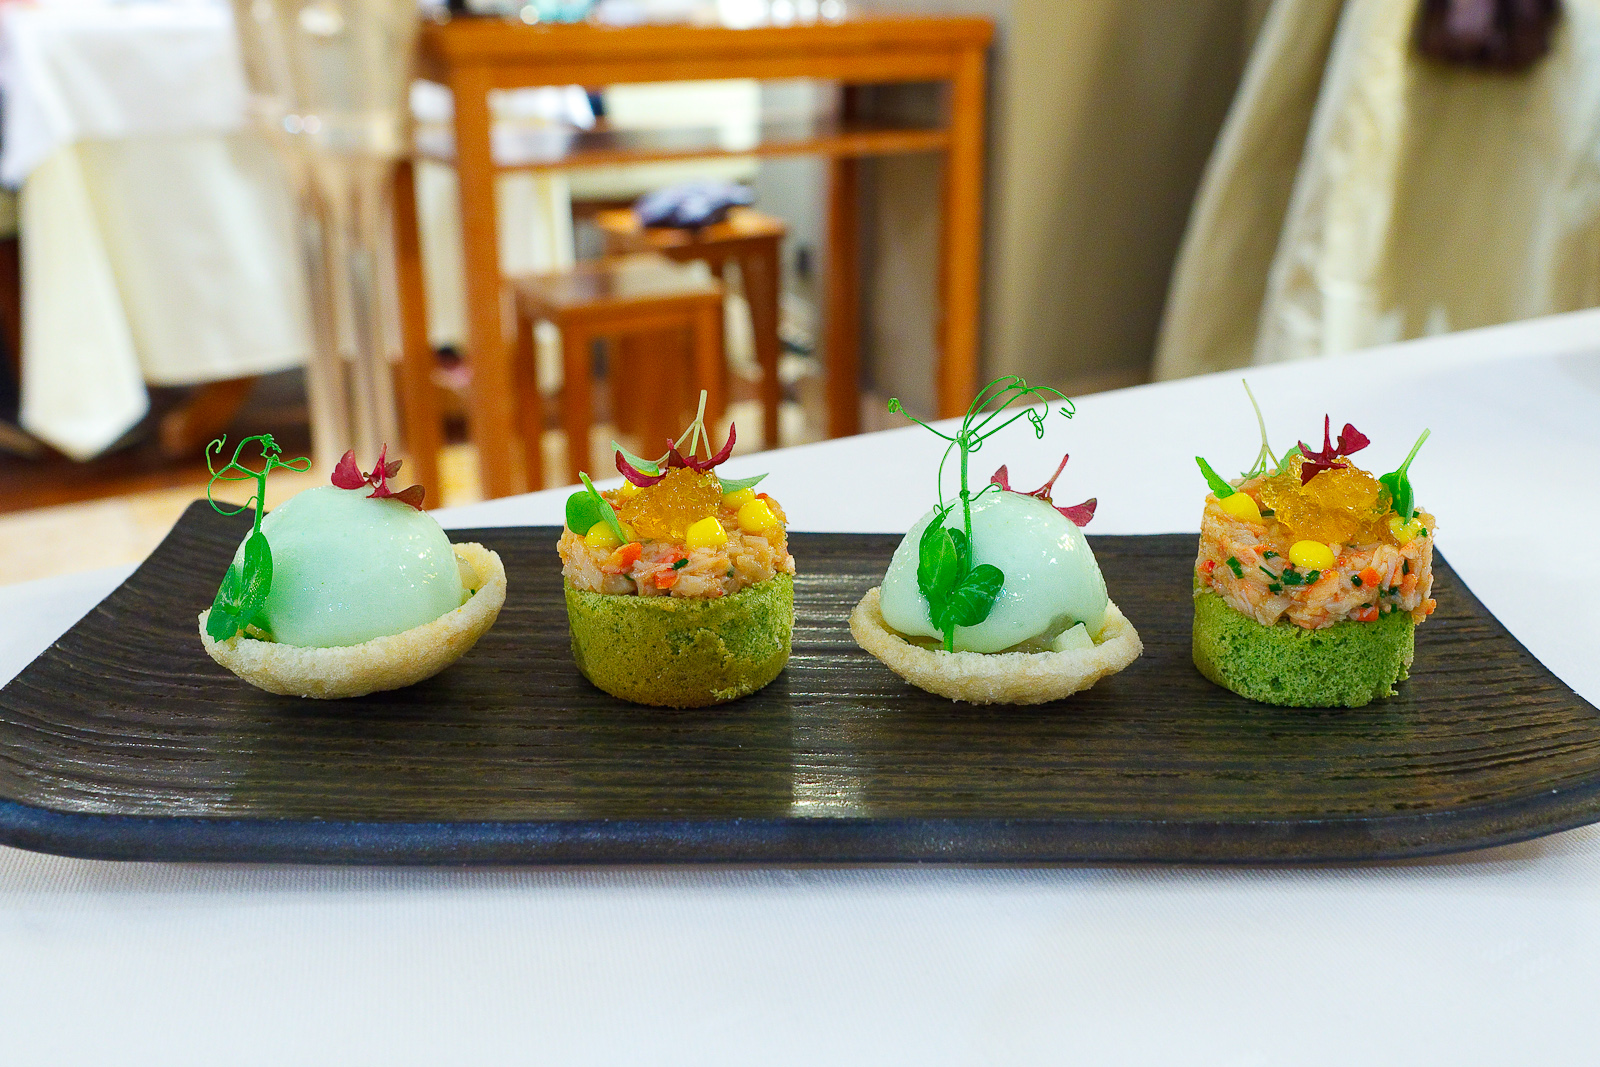 Amuse Bouche 6 and 7: Crab cracker with hamachi, fennel, and apple; Green tea biscuit with lobster and kimizu